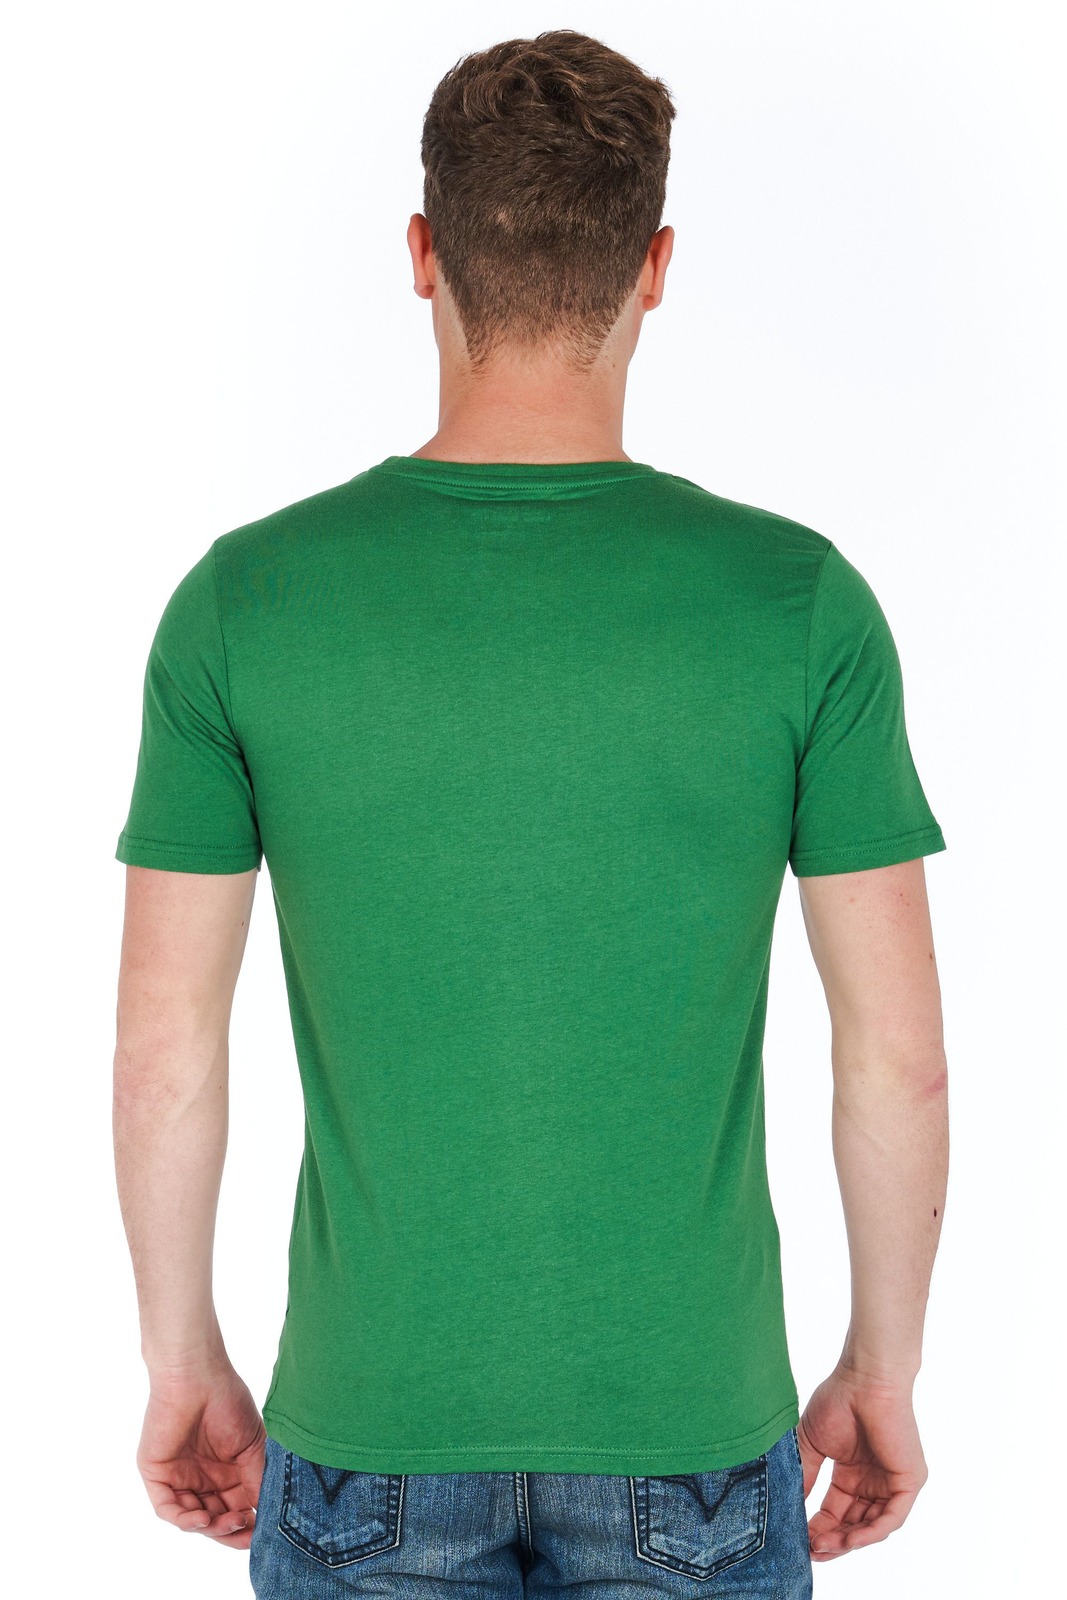 Jeckerson Green T-shirts for Men - LINE